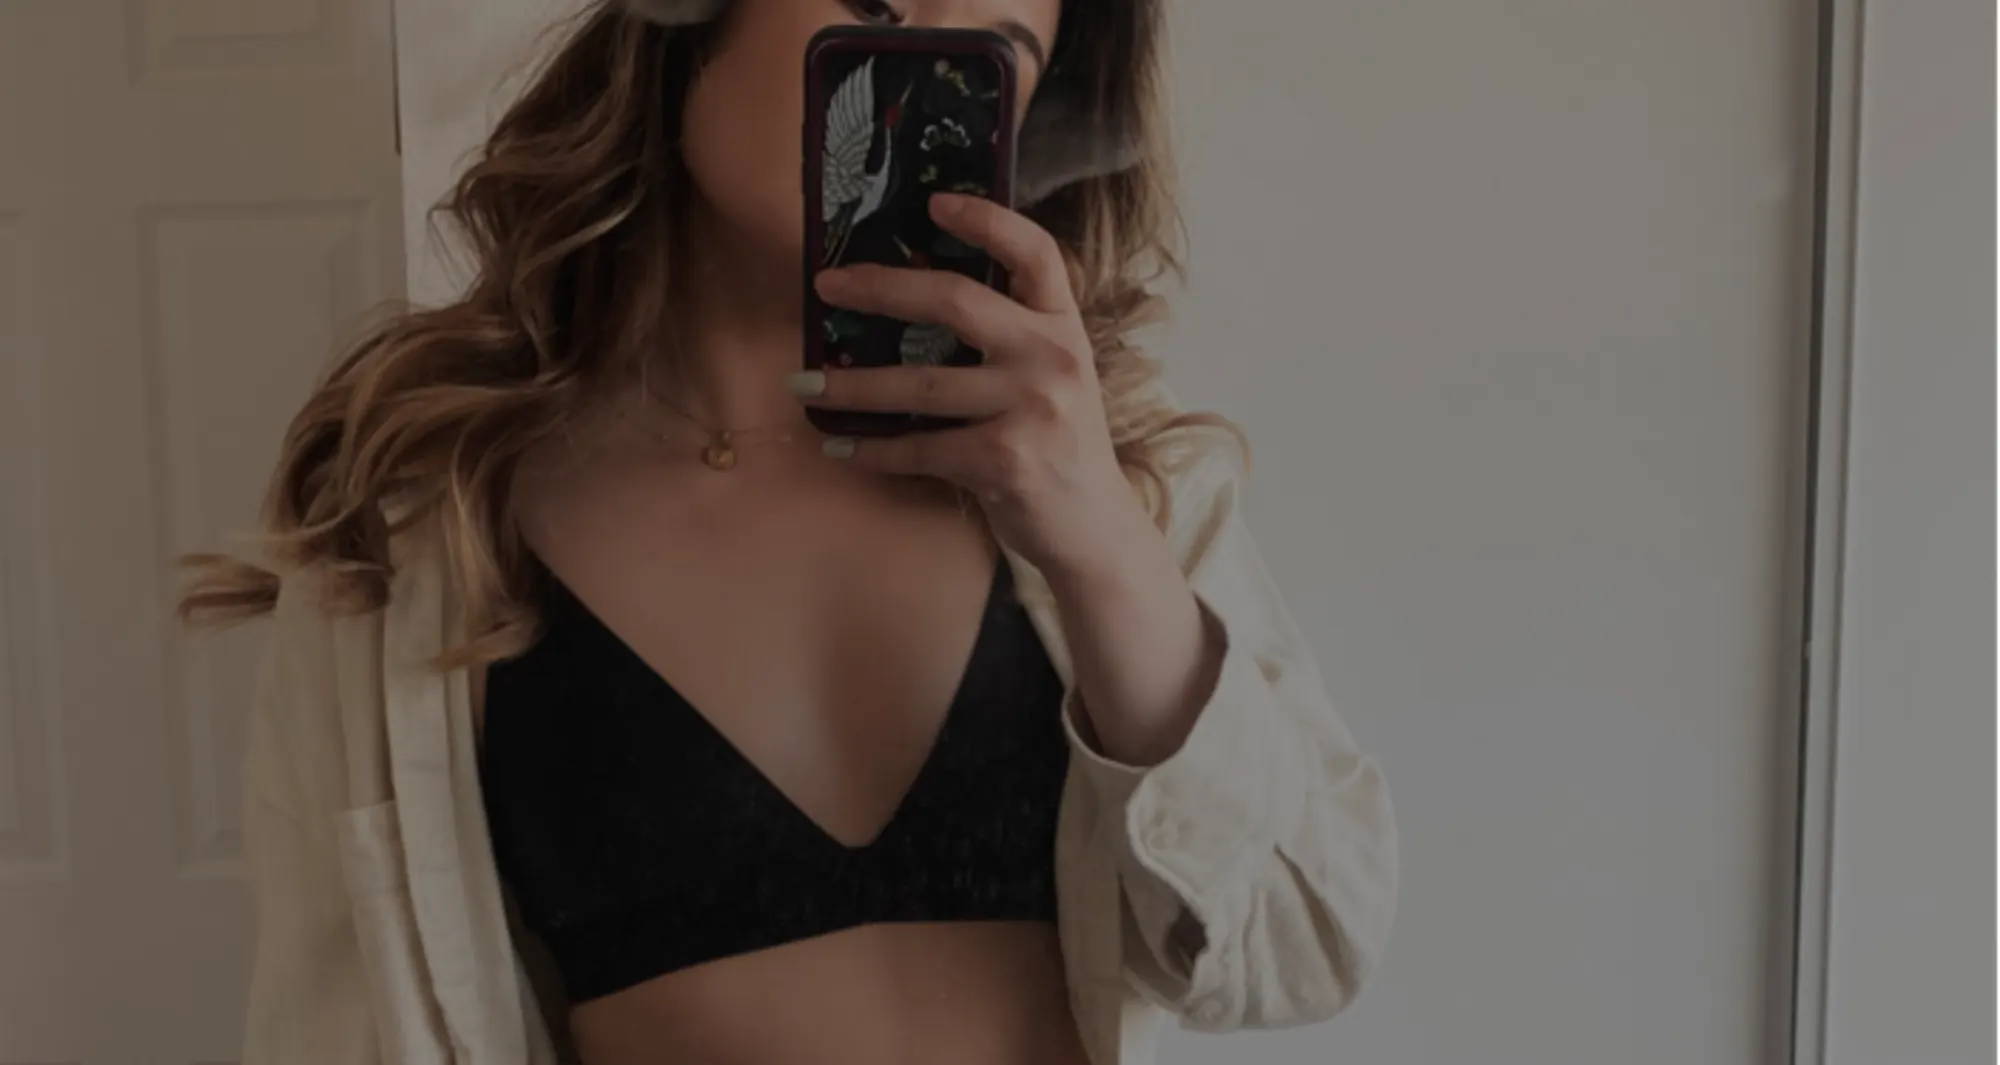  woman with long brown hair taking a mirror pic wearing a black triangle bralette, open cream shirt, and high rise jeans 